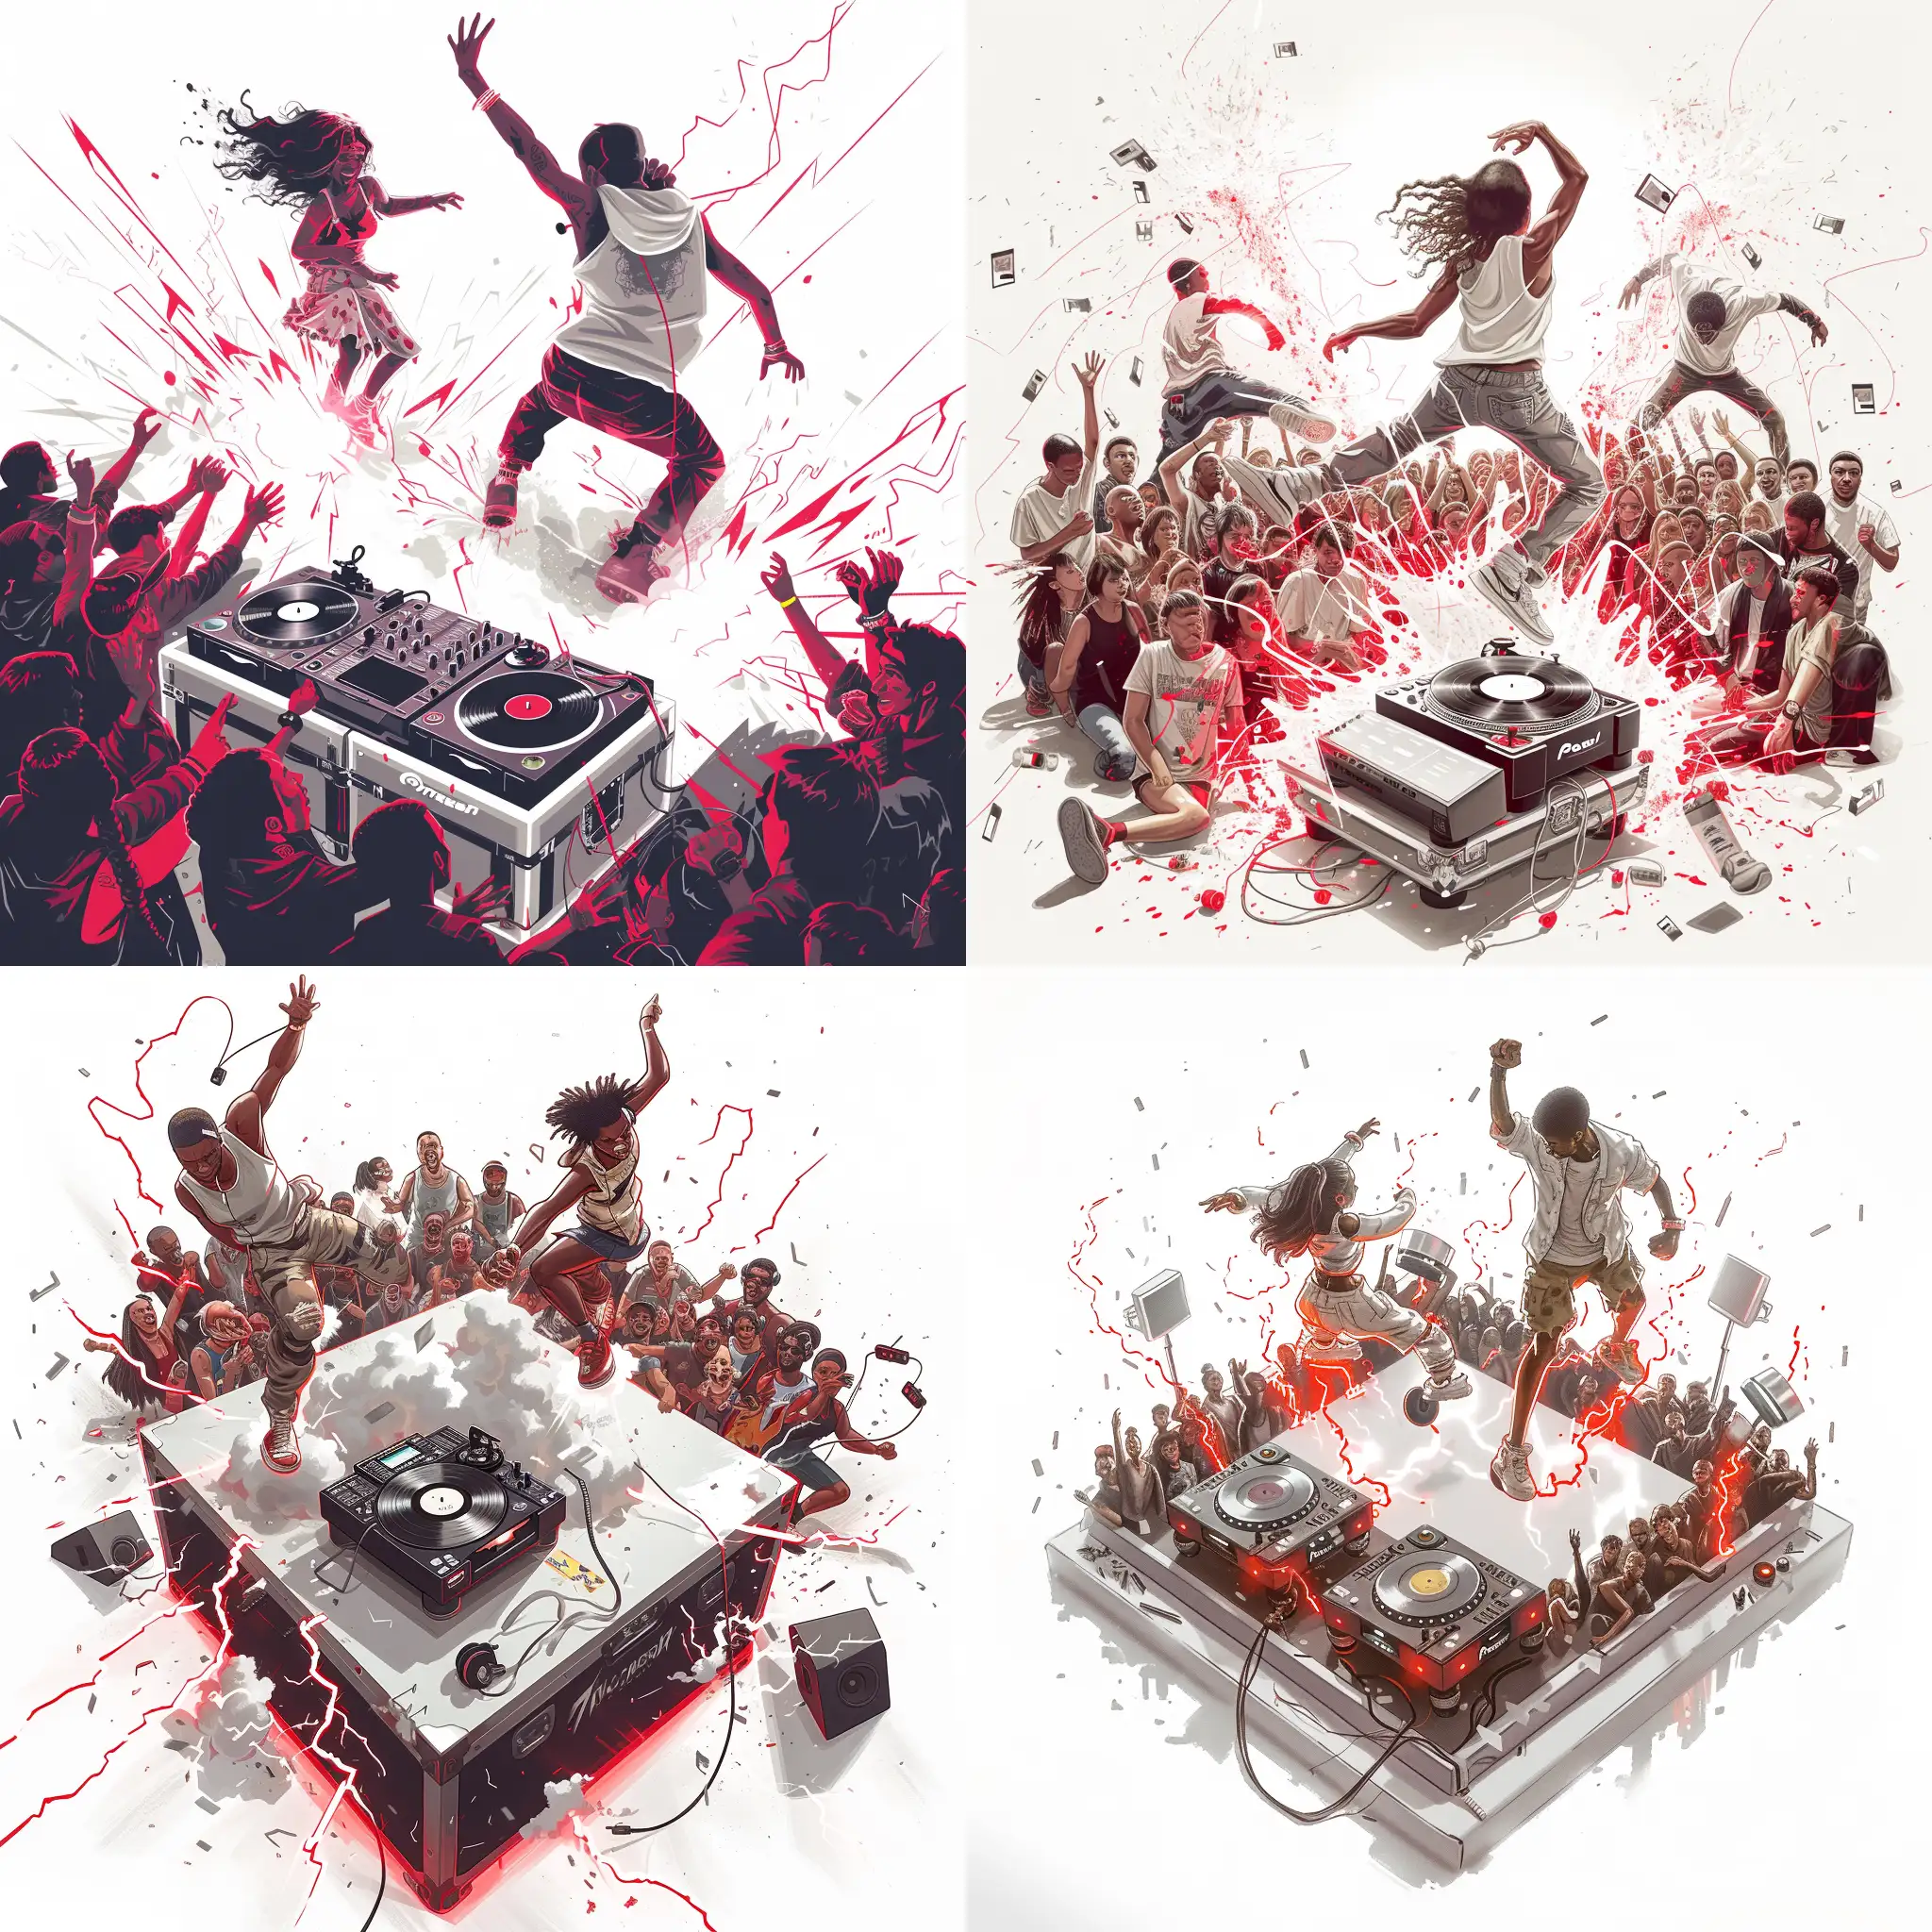 Dynamic-Breakdance-Battle-with-Vibrant-Crowd-and-DJ